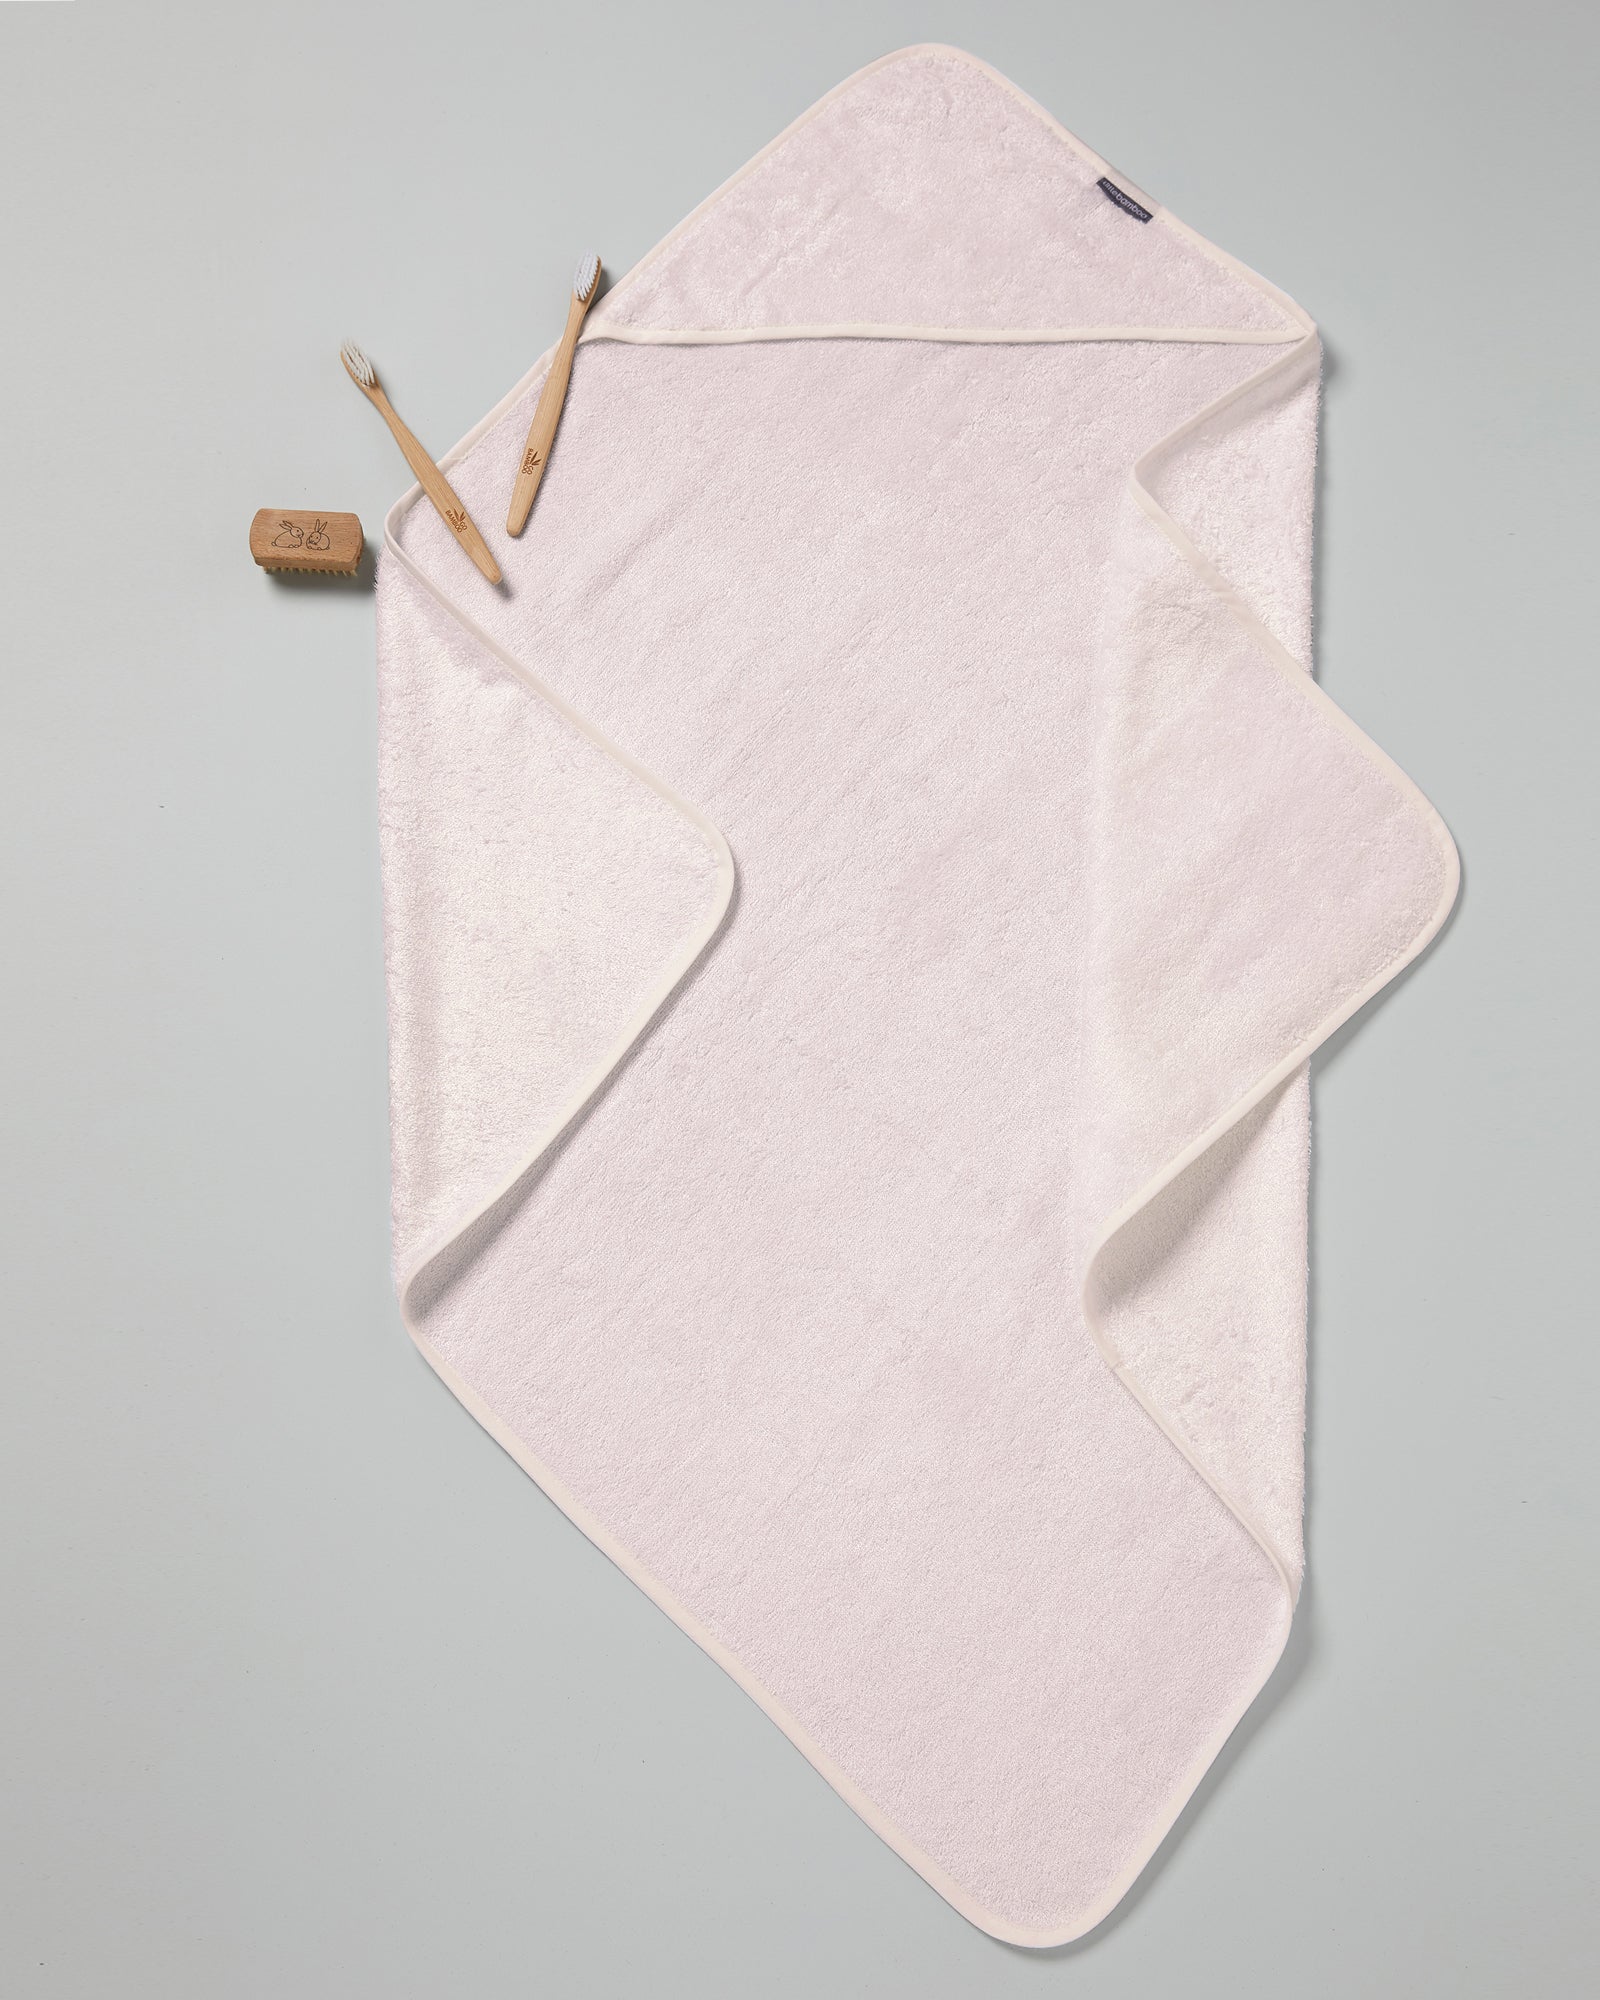 Little Bamboo Baby Hooded Towel - Dusty Pink